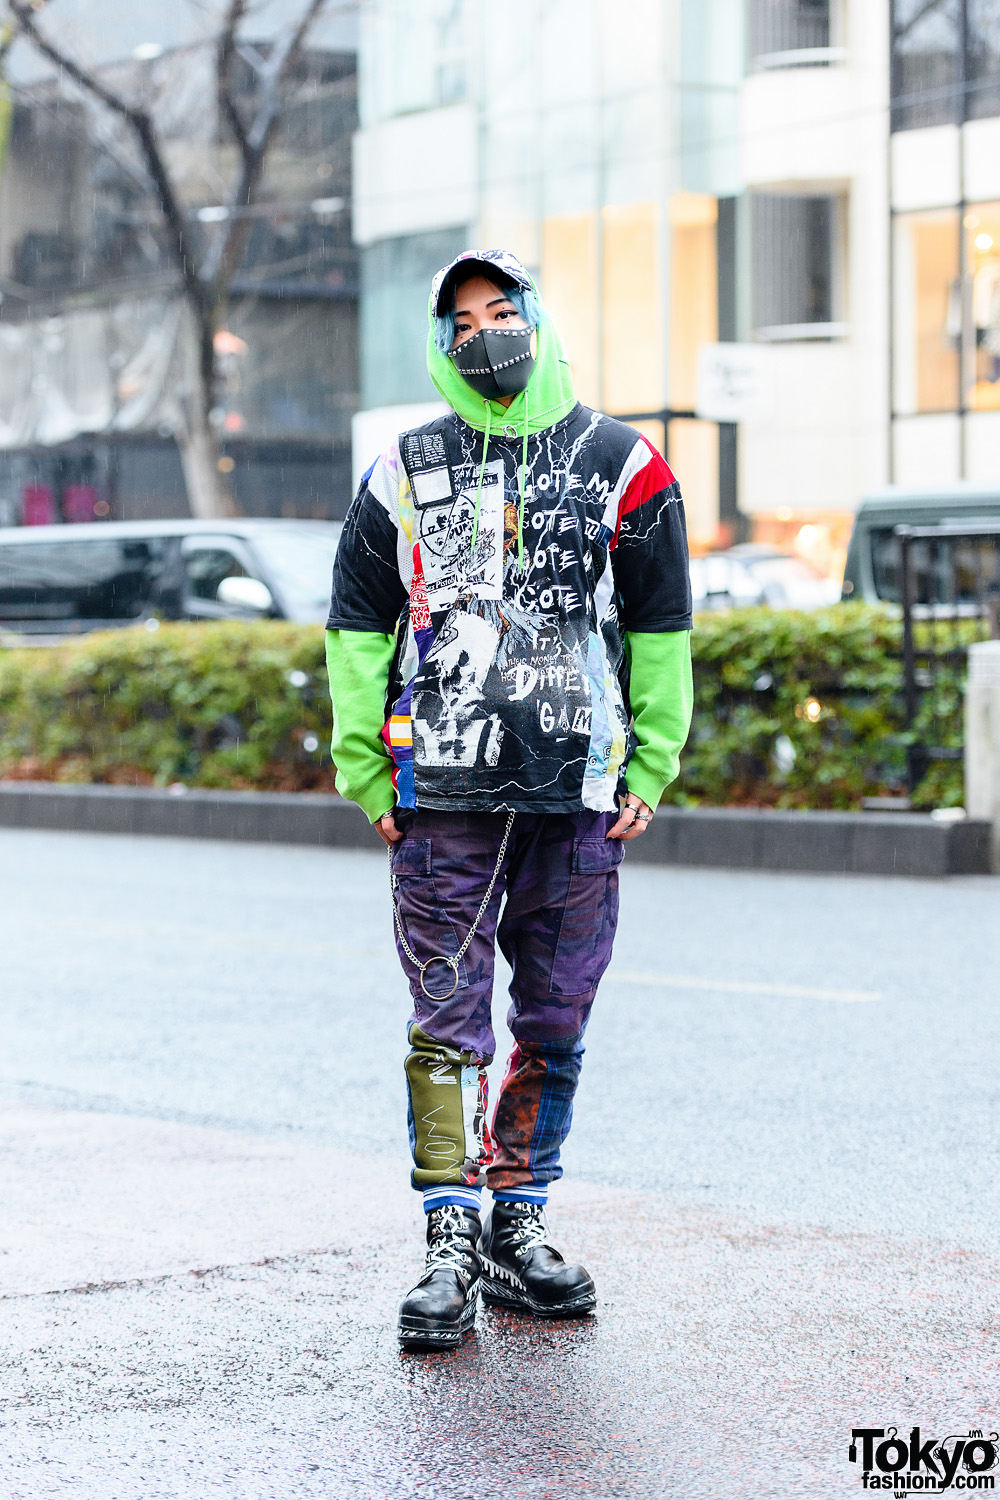 Cote Mer Tokyo Graphic Streetwear Style w/ Studded Face Mask, Graphic Shirt, M&Ms Hoodie, Color Camo Pants & Platform Boots